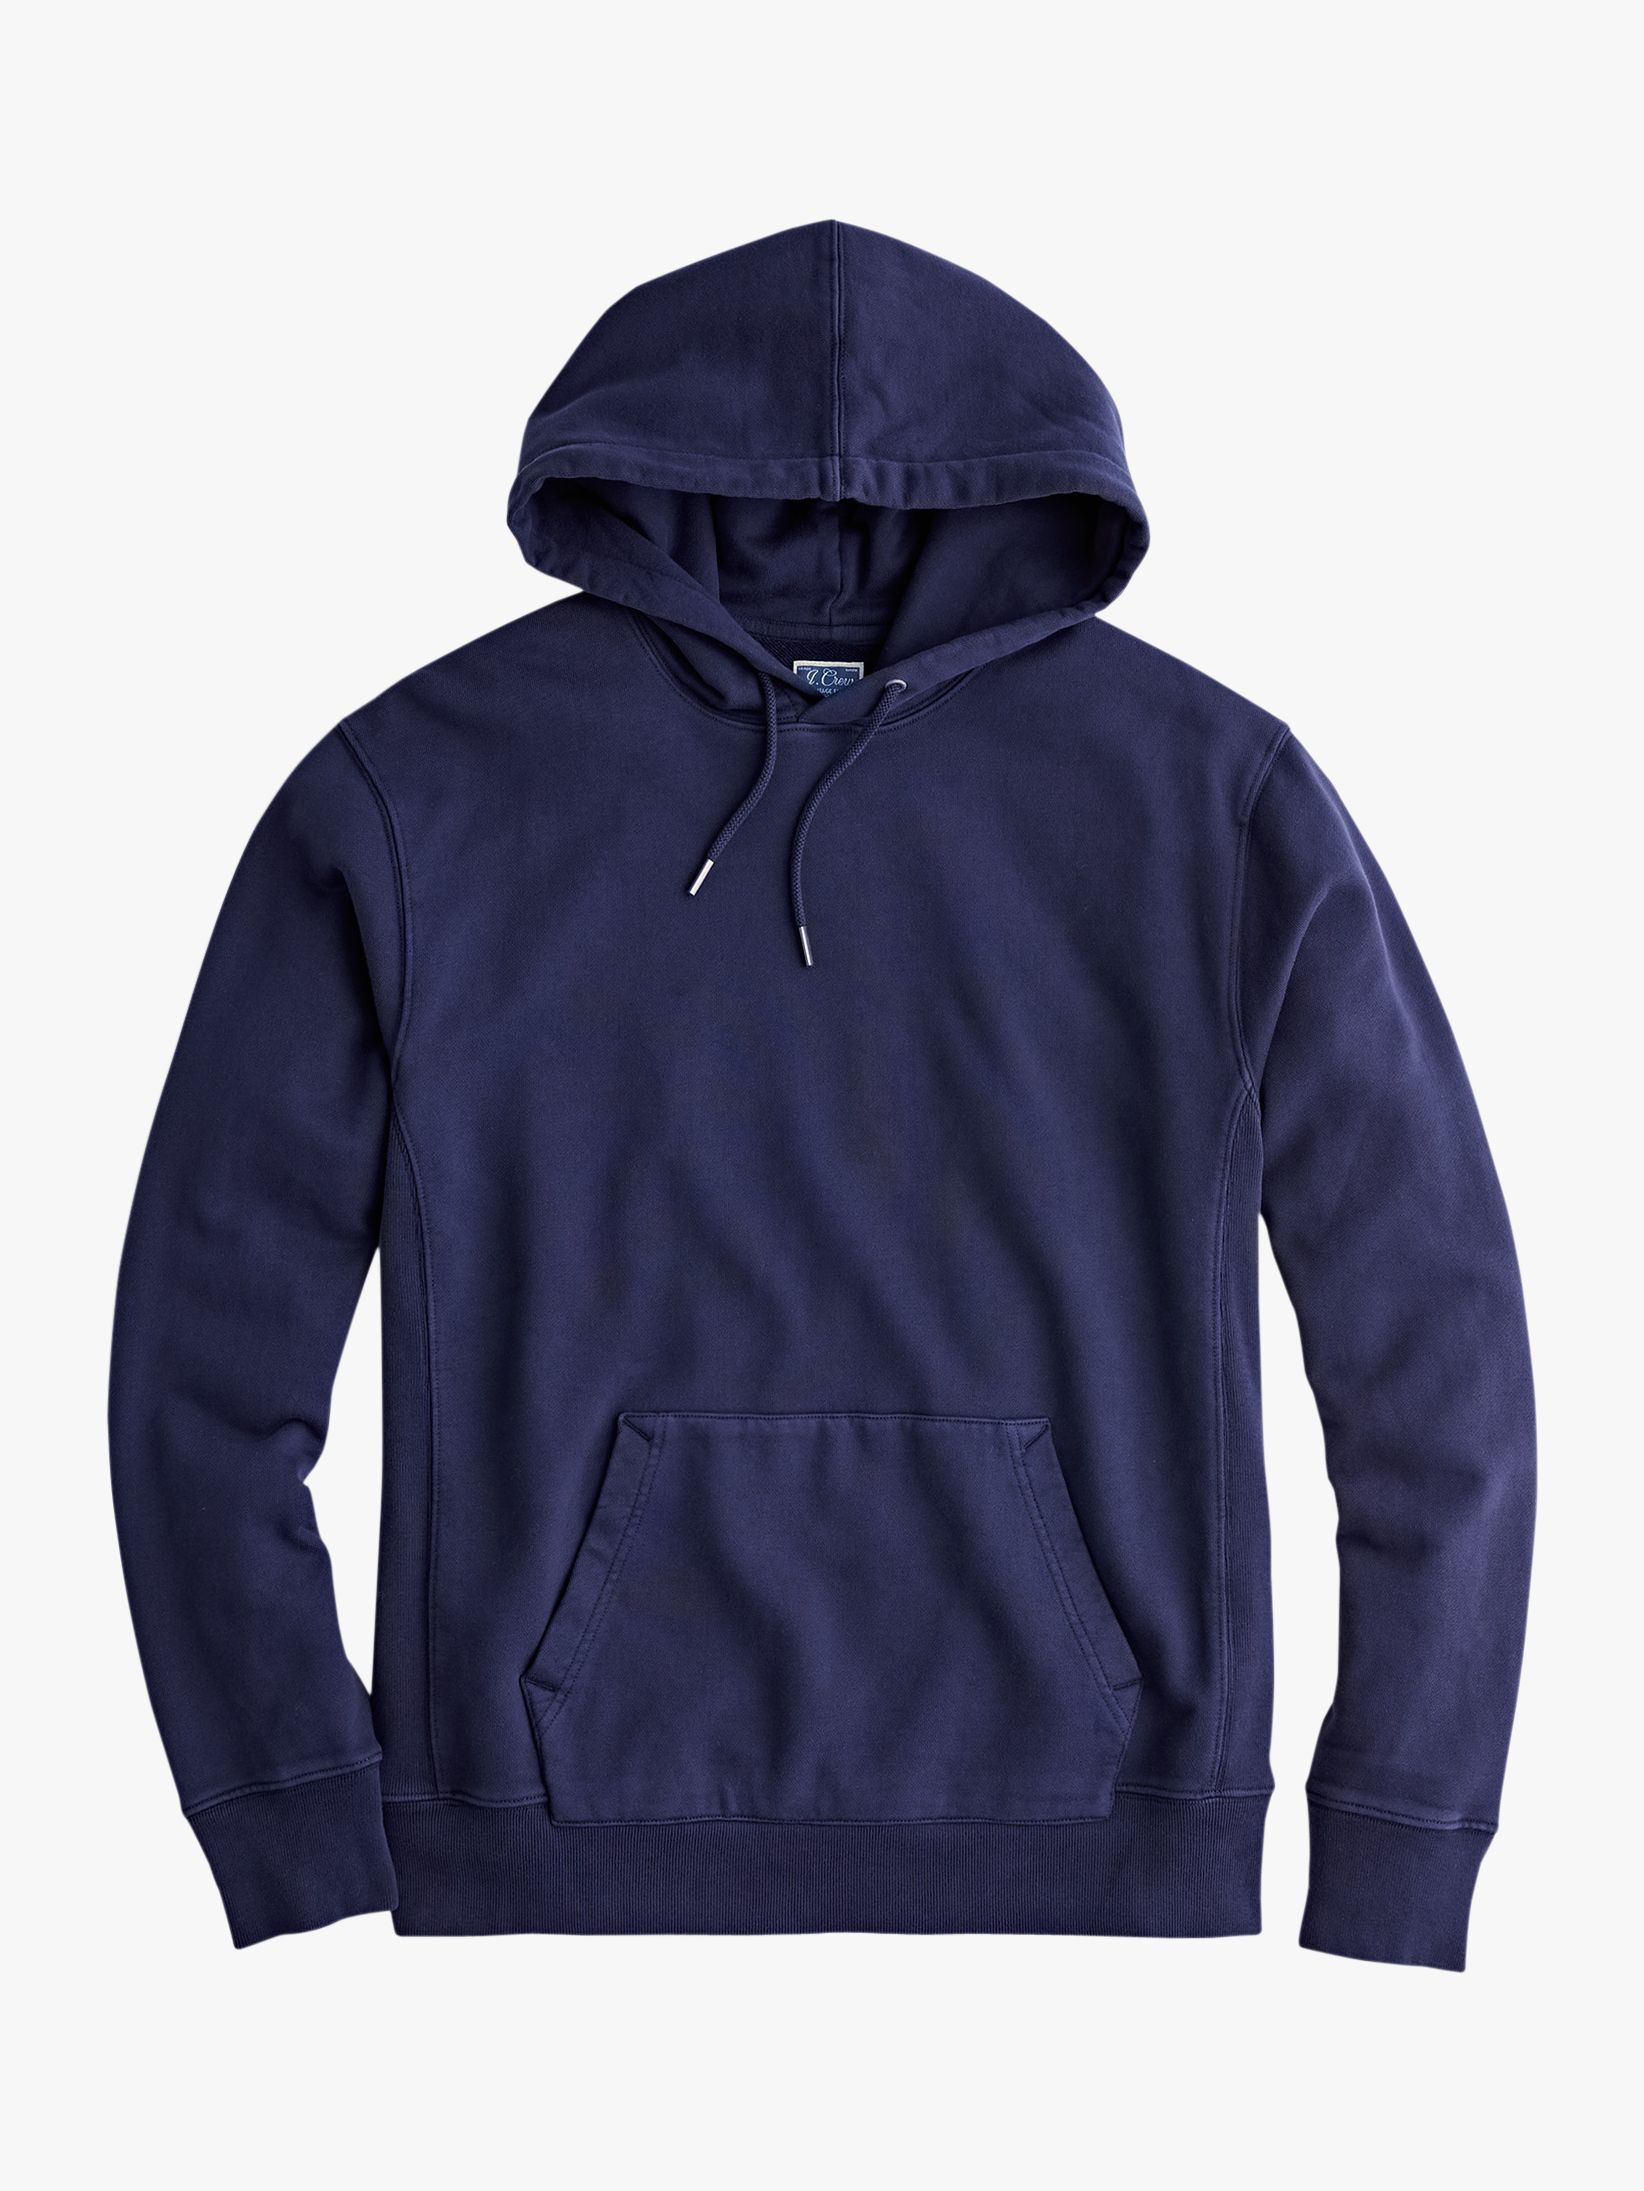 J.Crew Classic French Terry Hoodie, Washed Navy at John Lewis & Partners